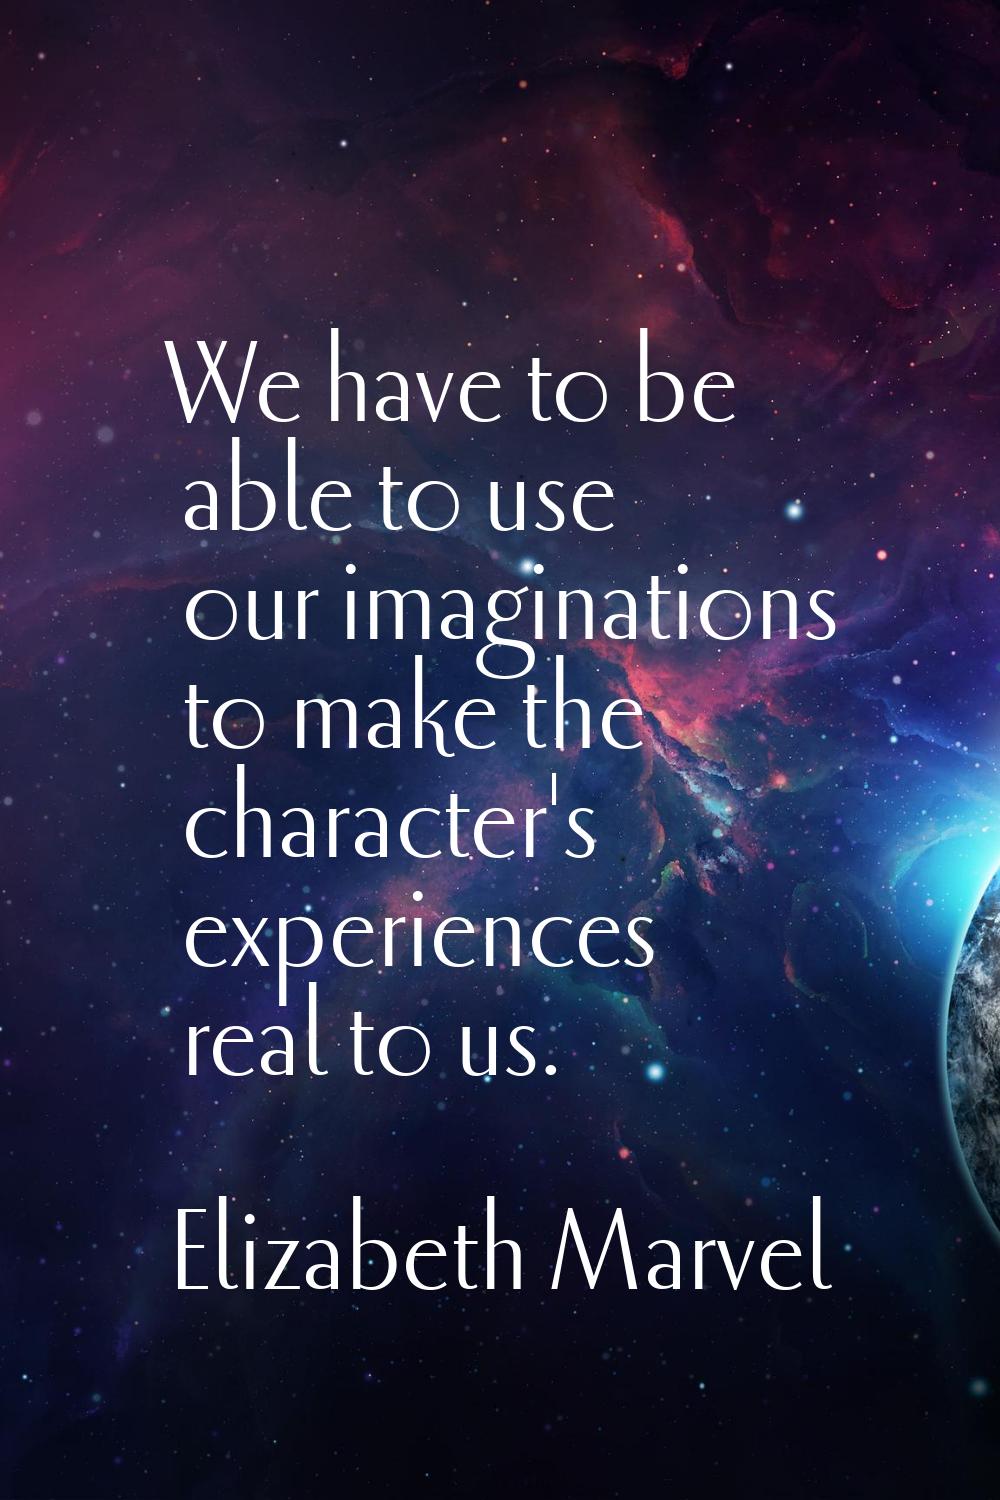 We have to be able to use our imaginations to make the character's experiences real to us.